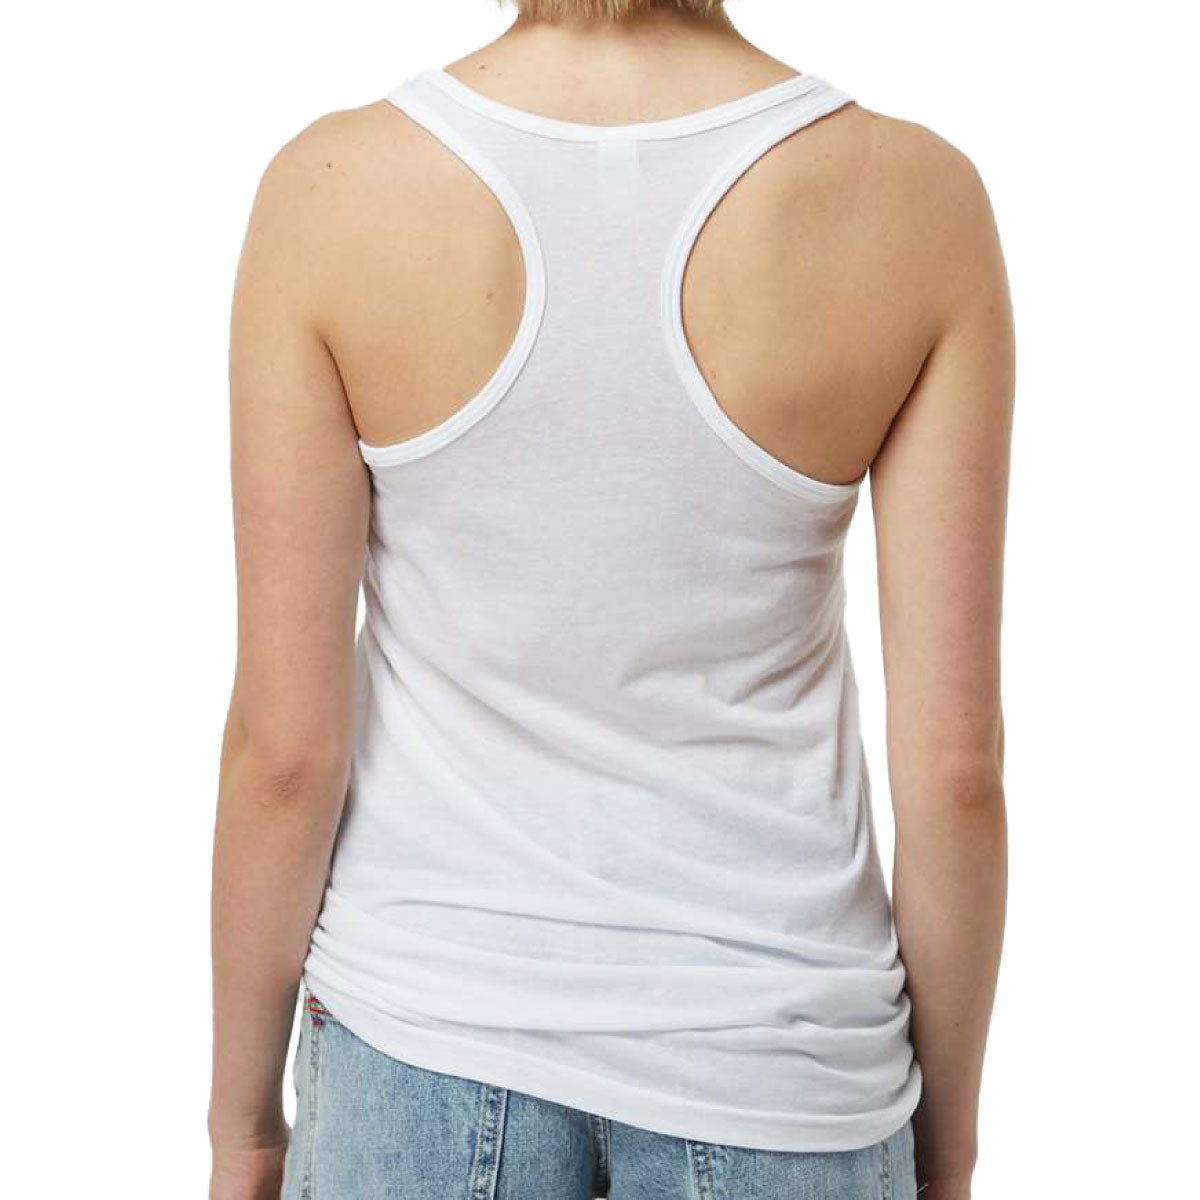 Just Peachy Women's Racerback Tank Top - The LFT Clothing Company